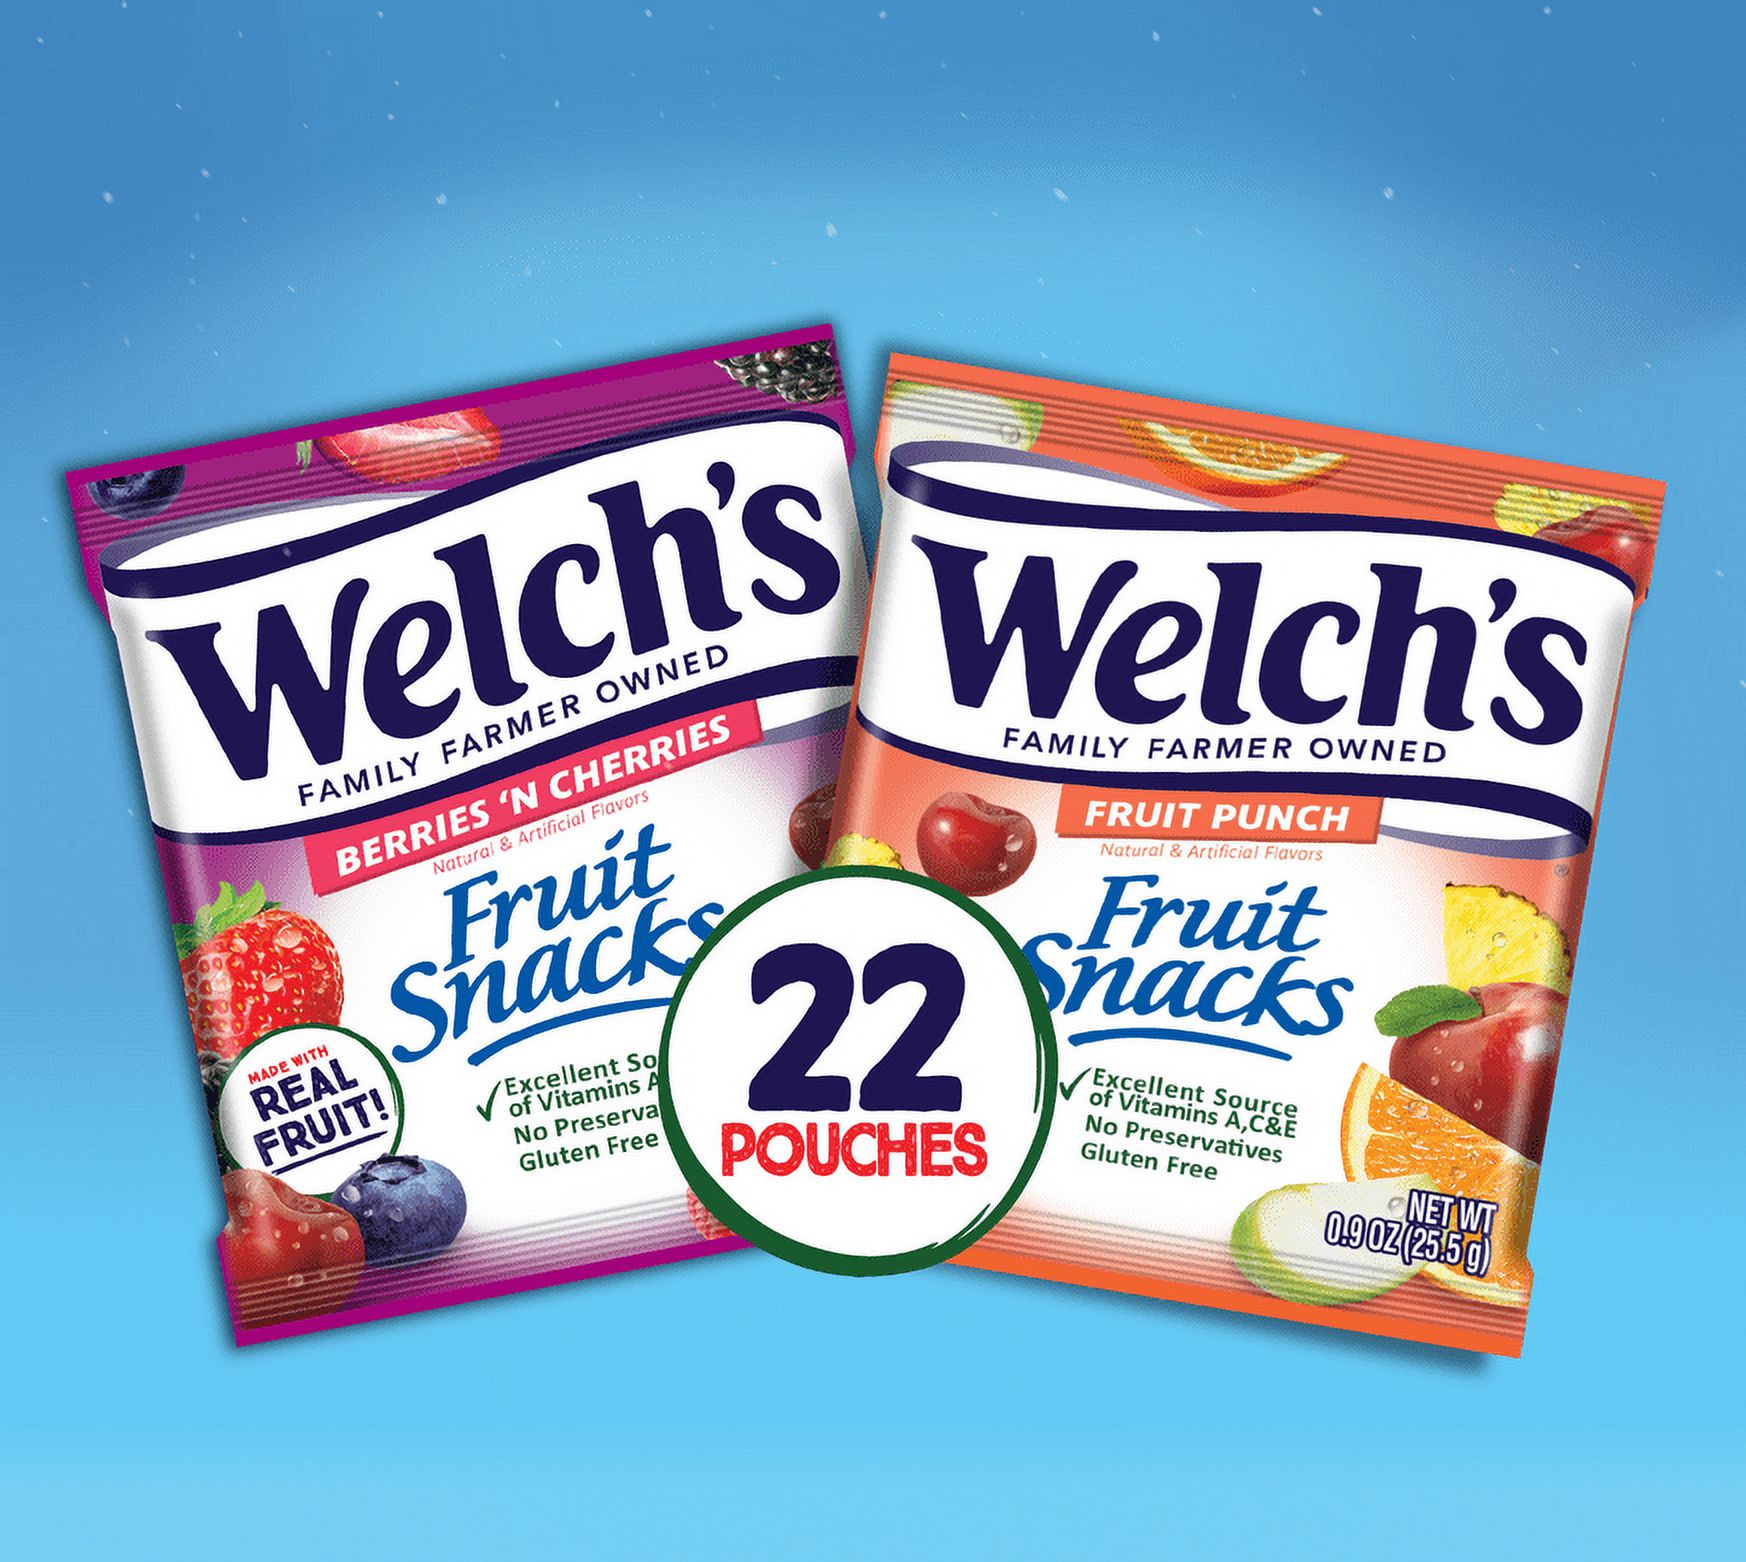 Welch's Fruit Punch and Berries 'N Cherries Fruit Snacks Variety Pack, 0.9 oz, 22 count - image 4 of 7